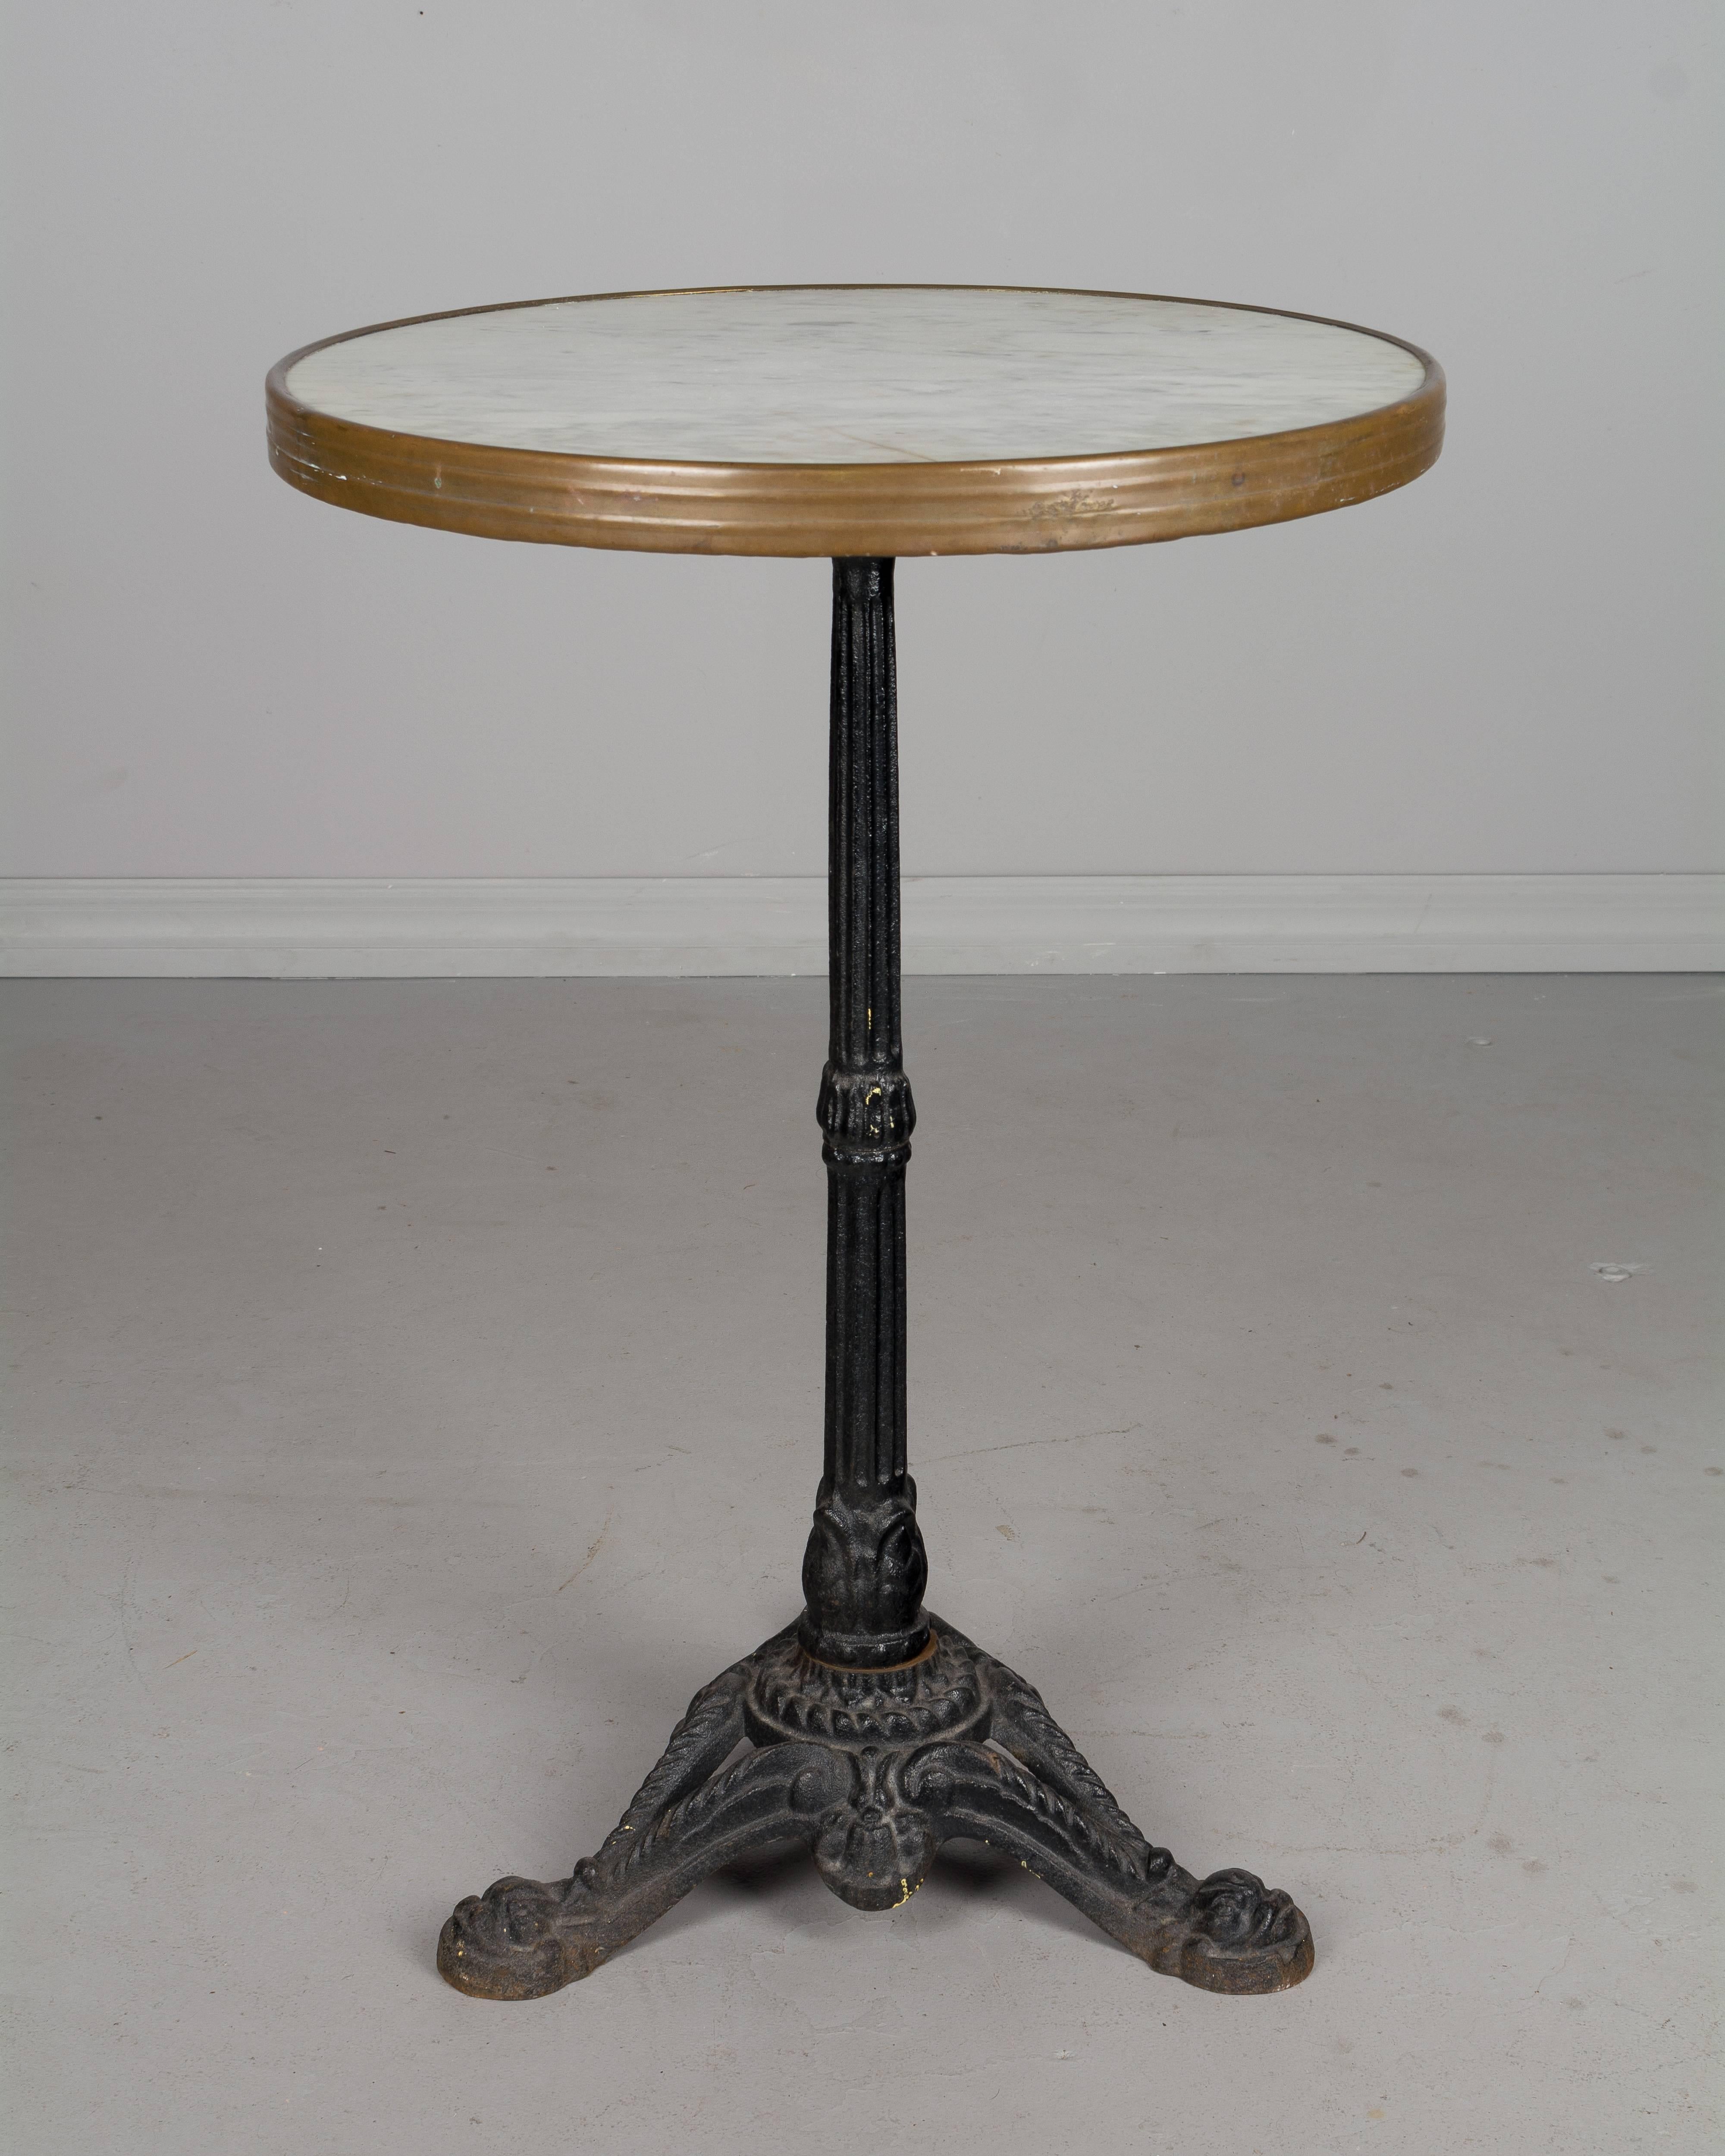 An early 20th century French cast iron bistro table. Original white marble top with brass surround. Very well made and in excellent condition. Please refer to photos for more details. We have a large selection of French antiques at Olivier Fleury,